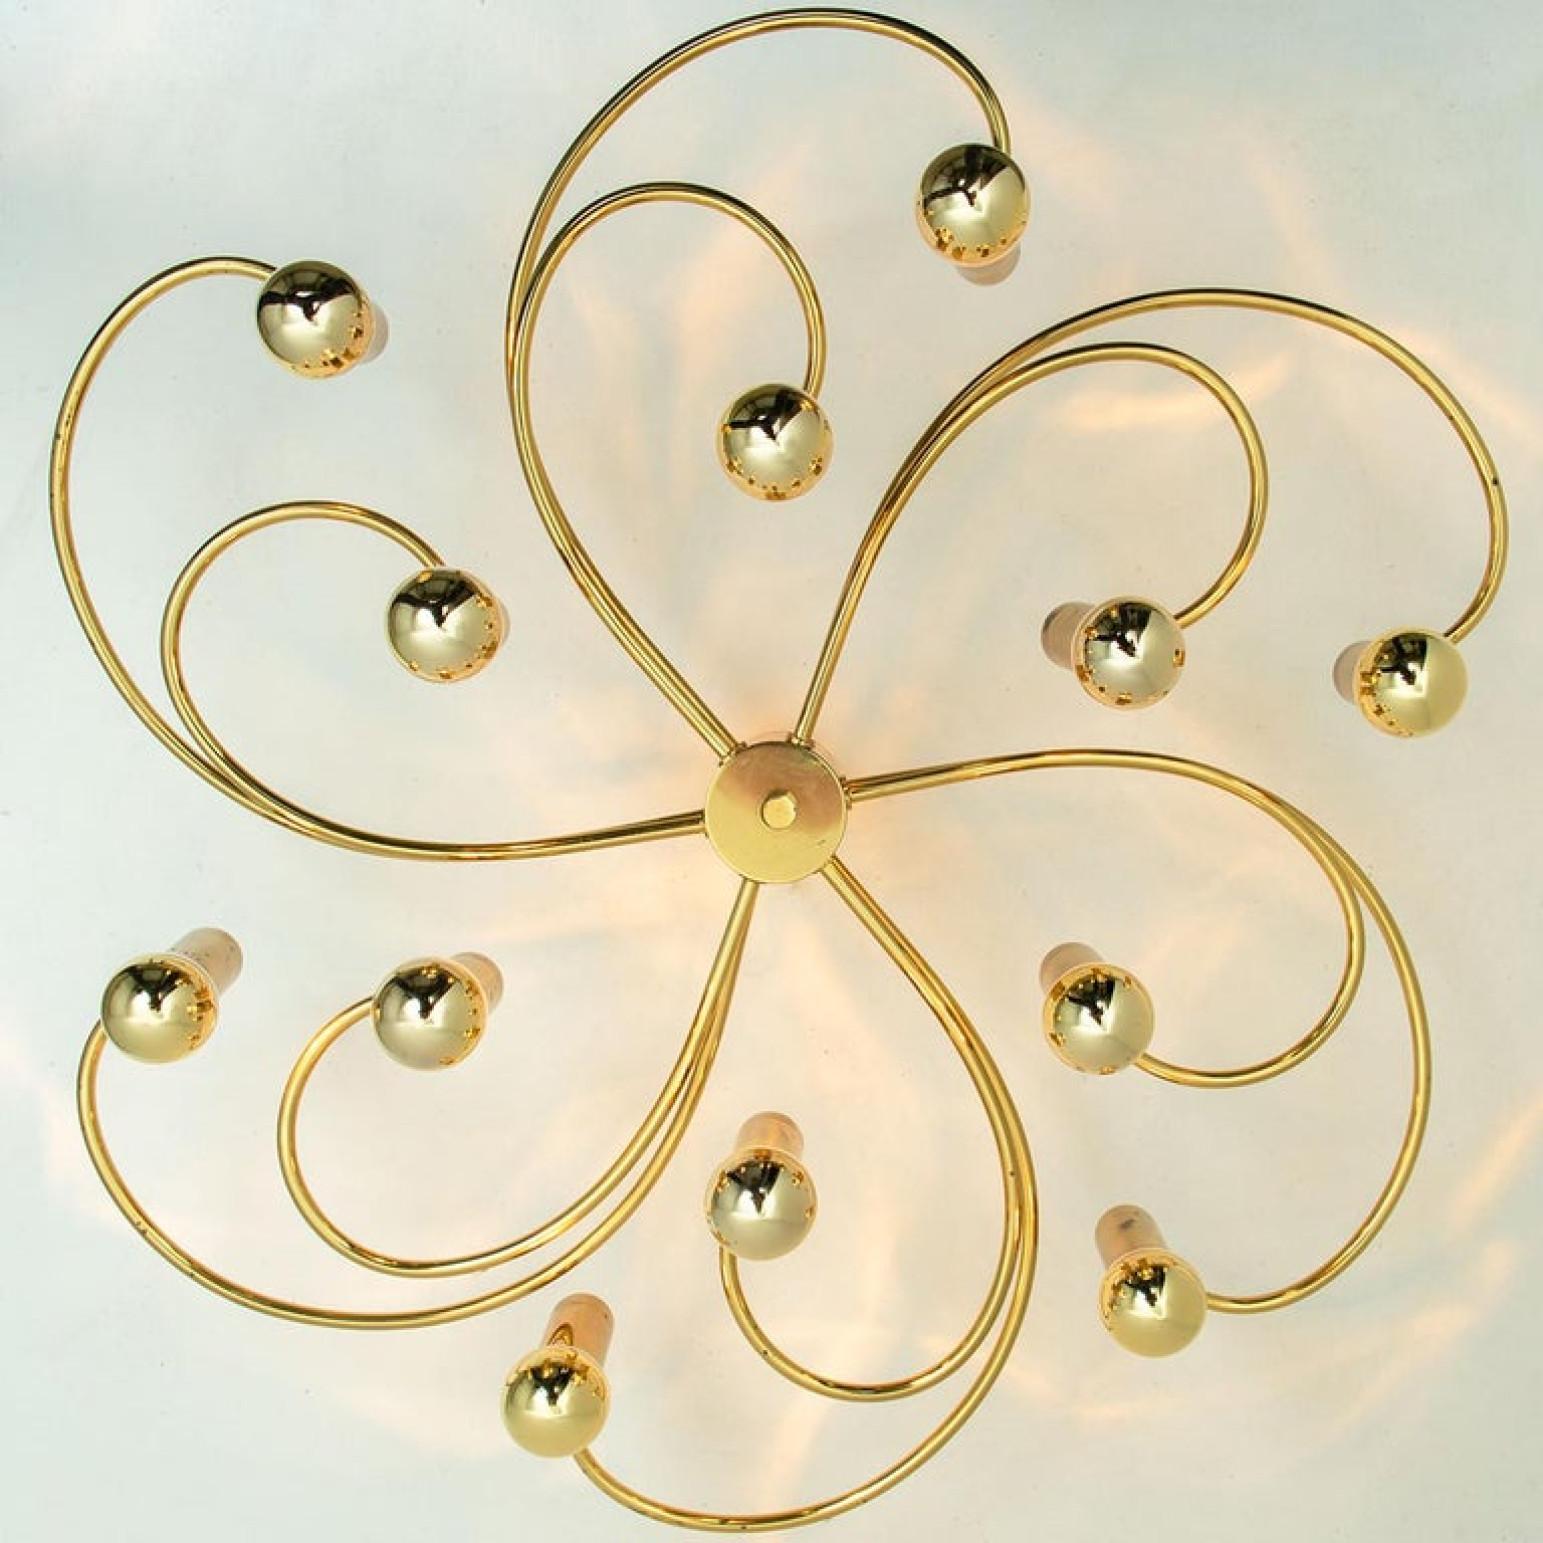 1 of the 2 Leola Sculptural Brass 13-Light Ceiling or Wall Flush Mount, 1970s In Good Condition For Sale In Rijssen, NL